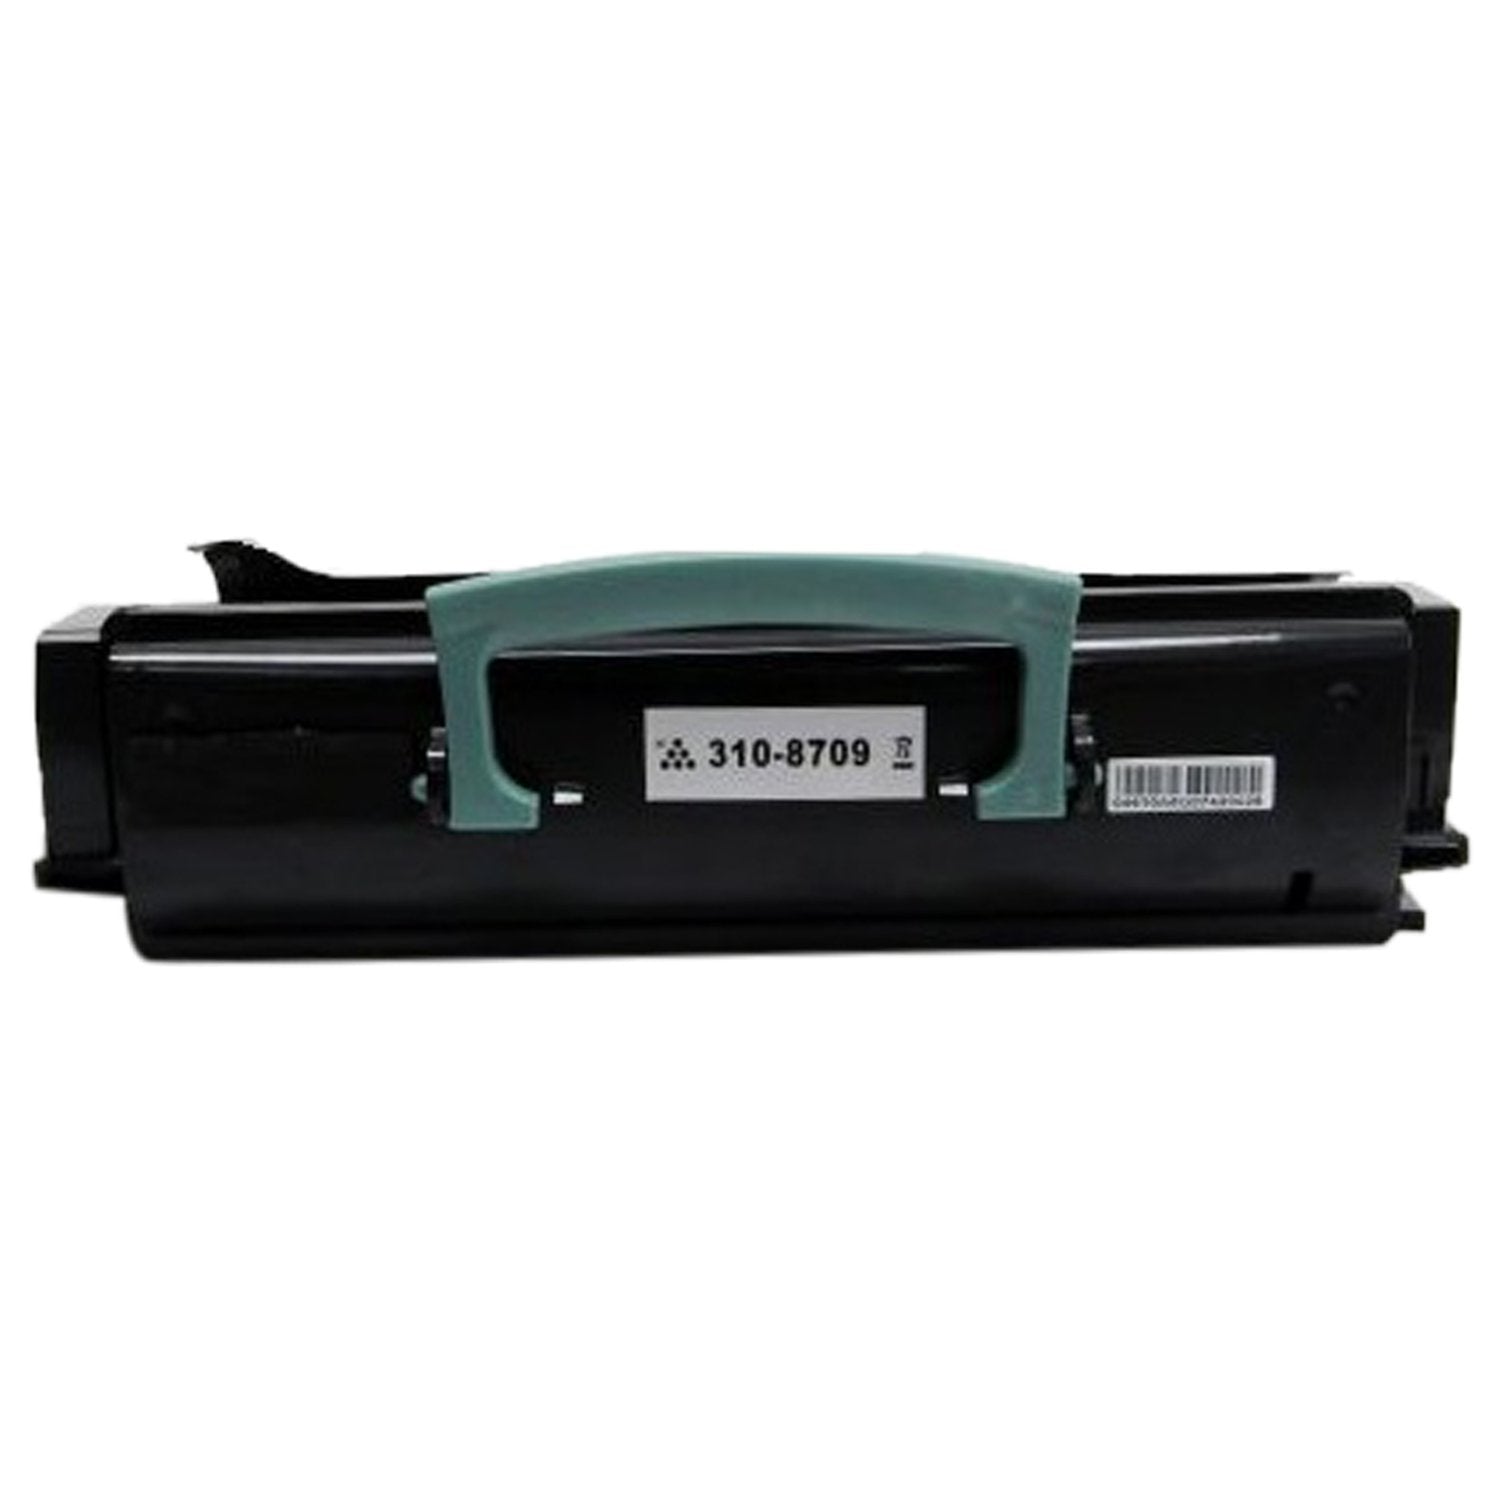 Absolute Toner Compatible Dell 310-8709 High Yield Black Toner Cartridge | Absolute Toner Dell Toner Cartridges